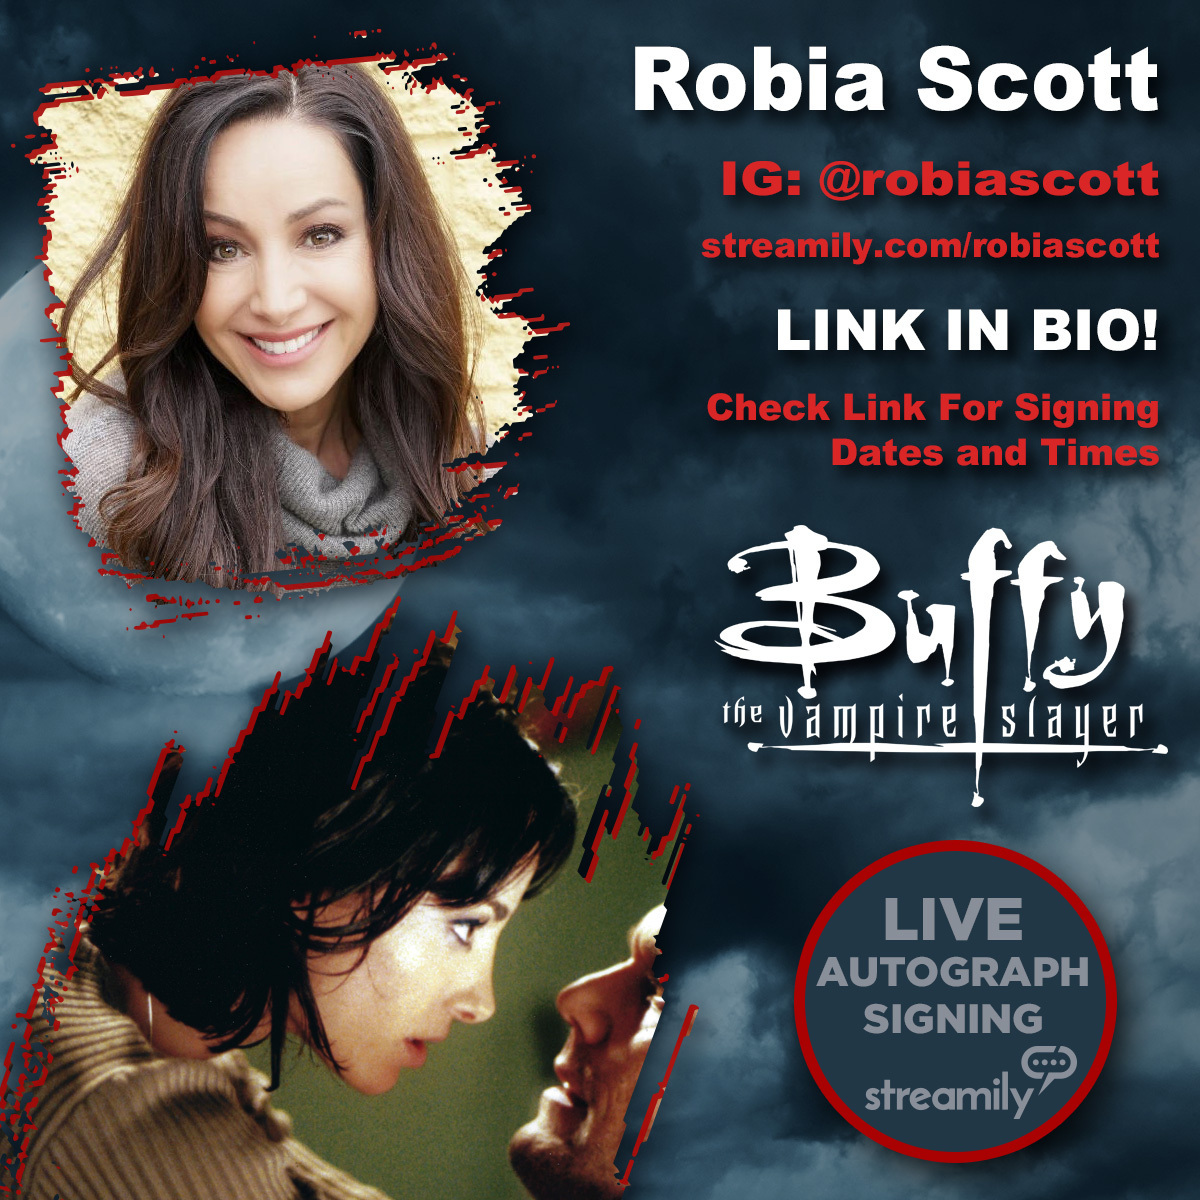 Mark your (Jenny) Calendar, fellow #BTVS fans! #RobiaScott will be hosting a LIVESTREAM autograph signing this Sunday, Feb. 6 at 12:30 PM PT. Reserve your favorite print now, and join Robia on IG this weekend! https://t.co/CPm5JpMbmN https://t.co/LucVvo9ZUL